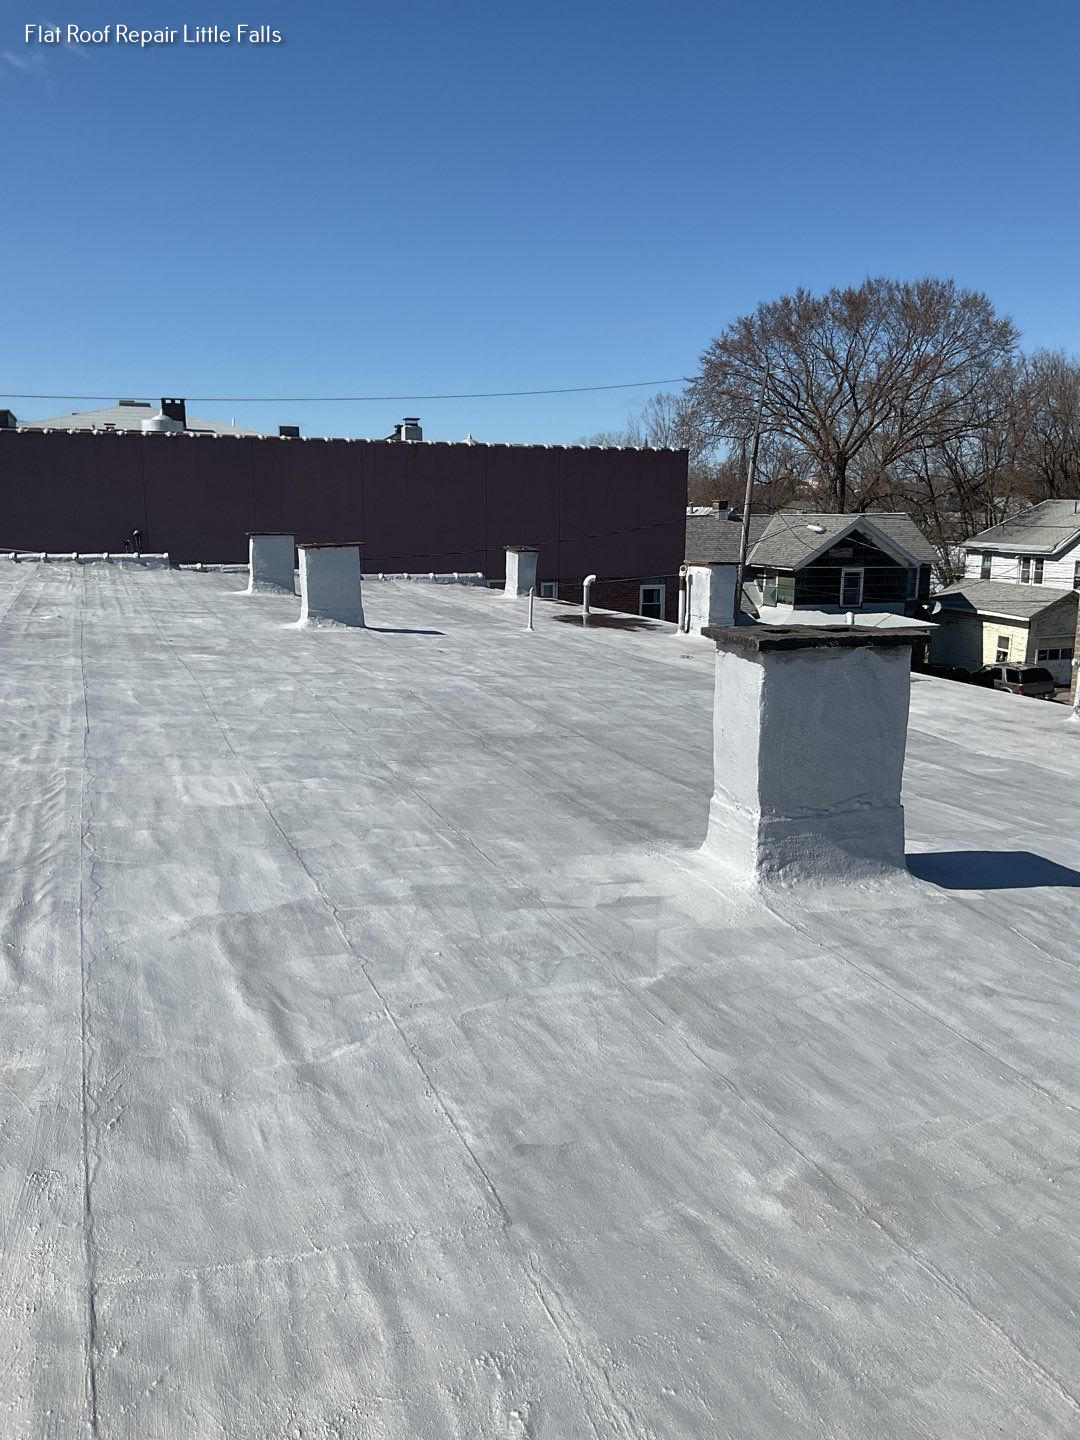 The Number One Commercial Roofing Contractor around Little Falls, NY